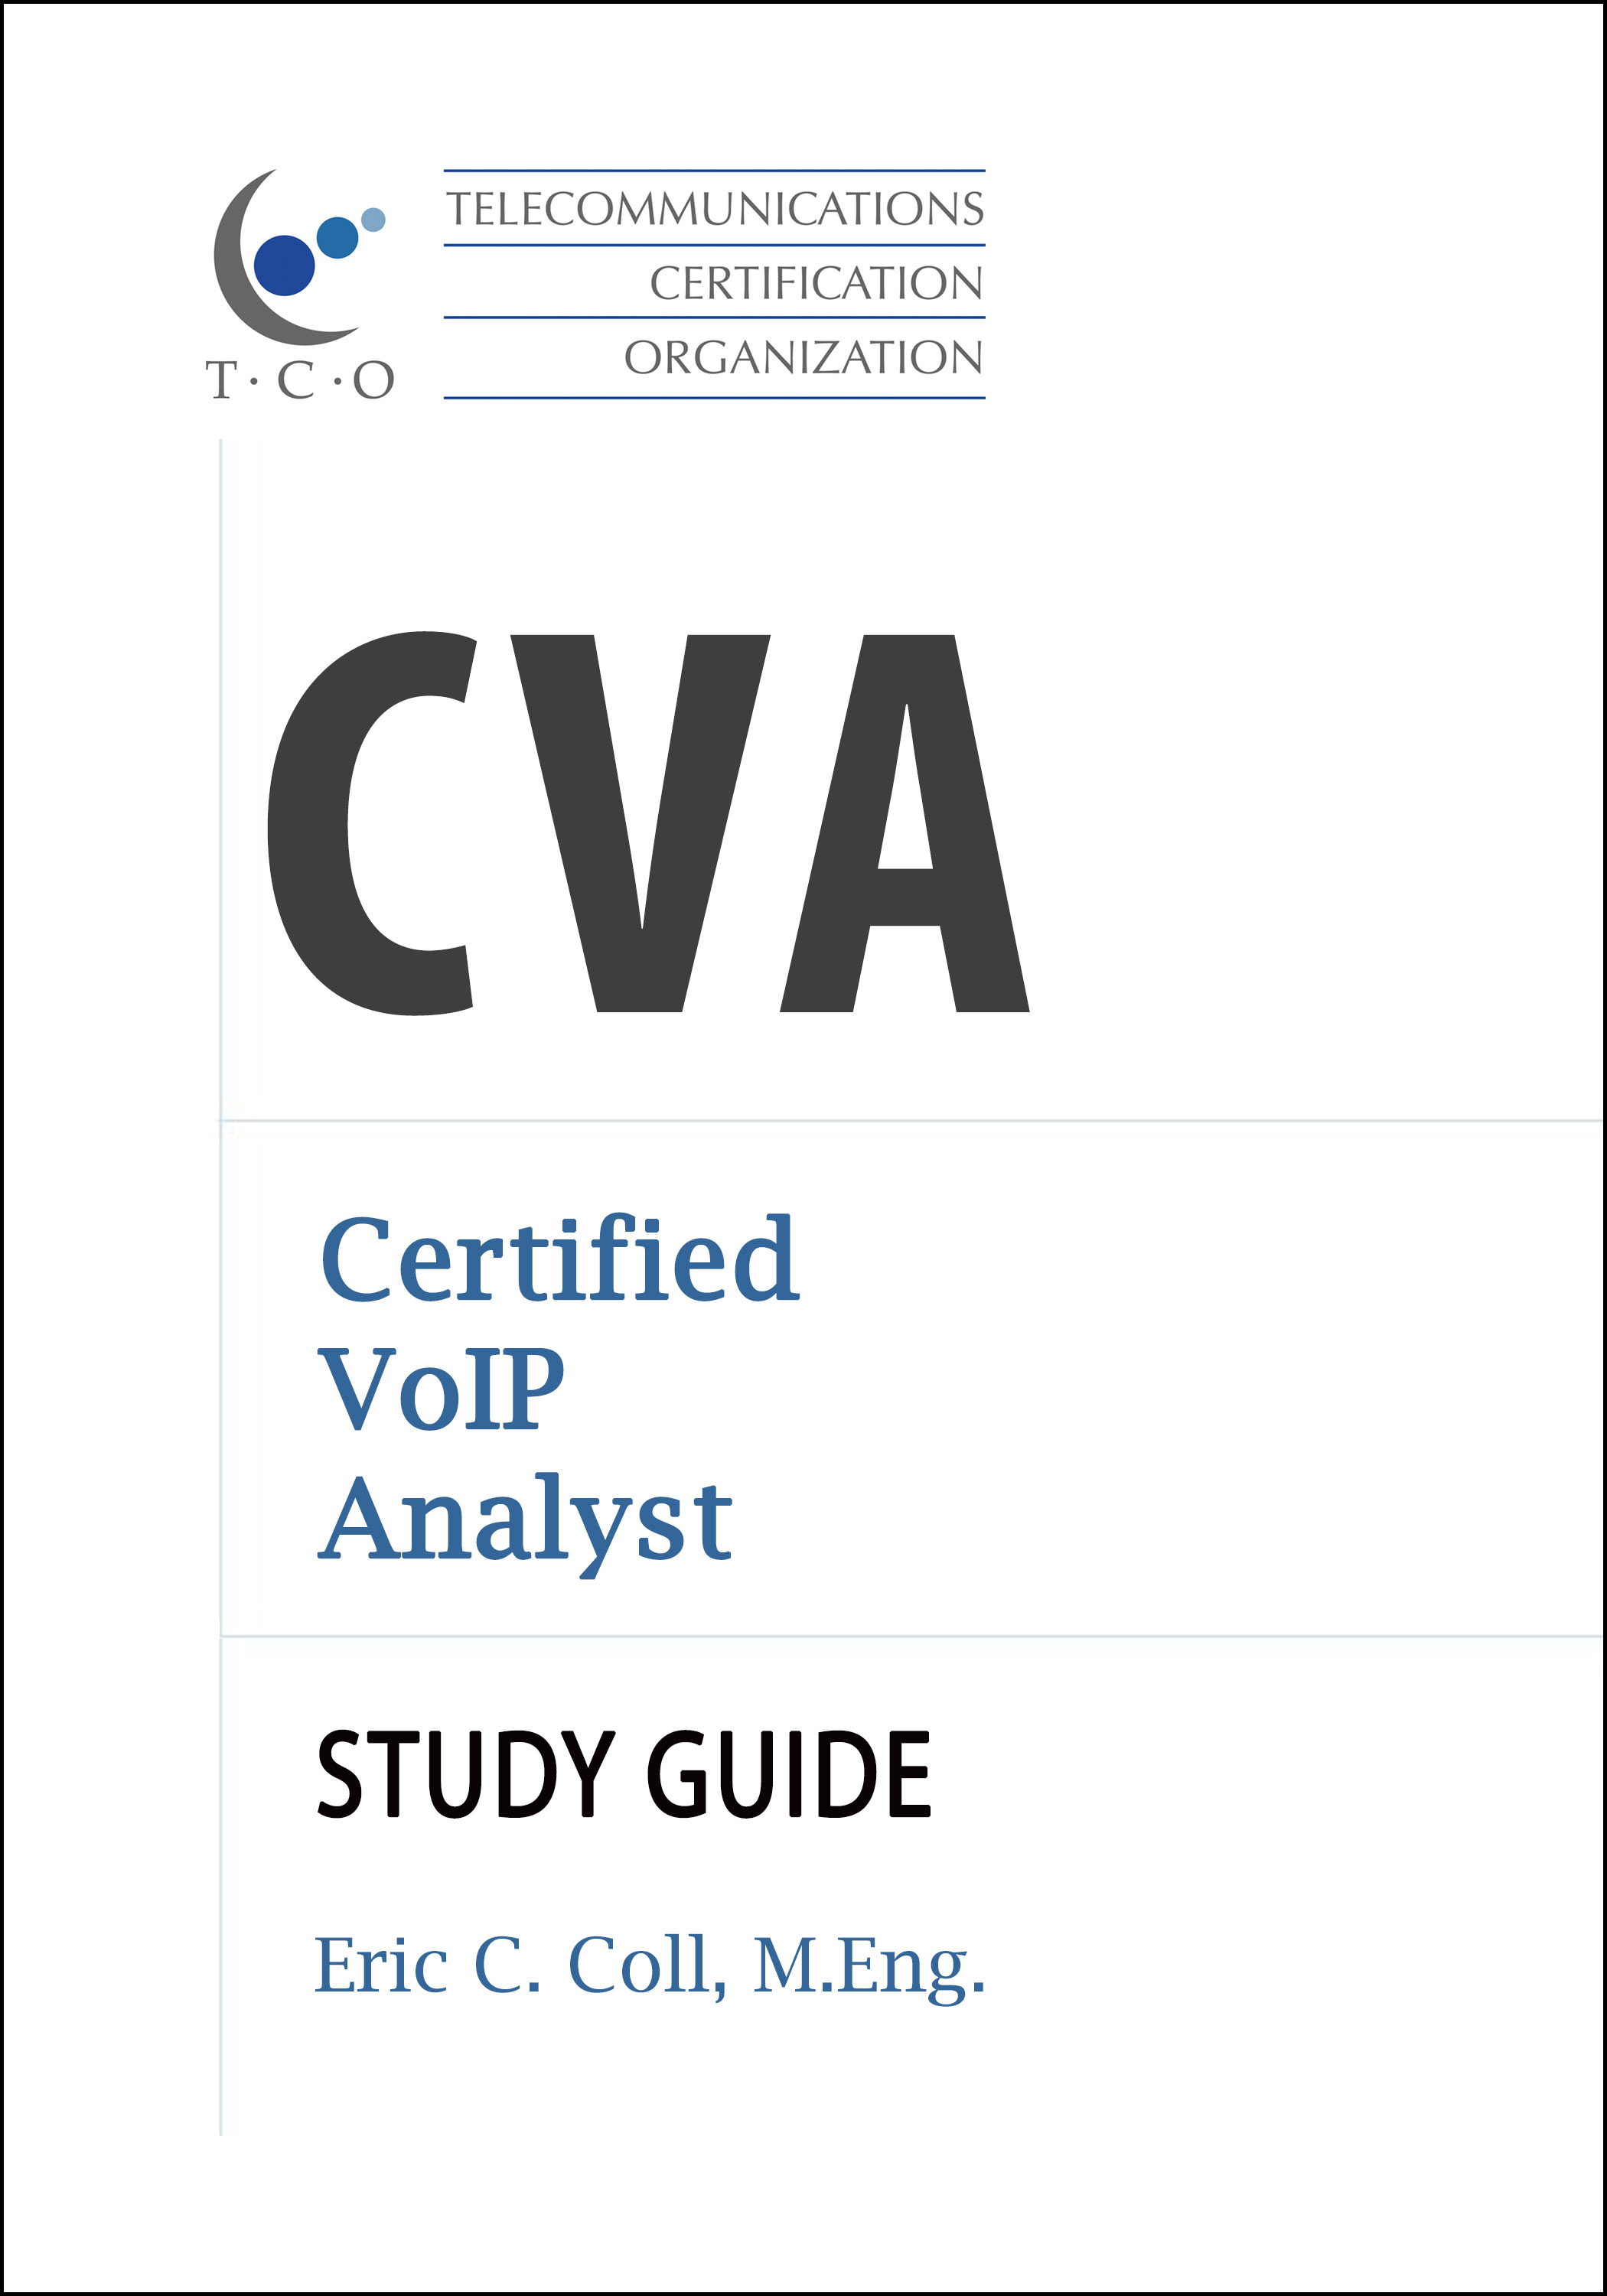 TCO Certified VoIP Analyst (CVA) Study Guide